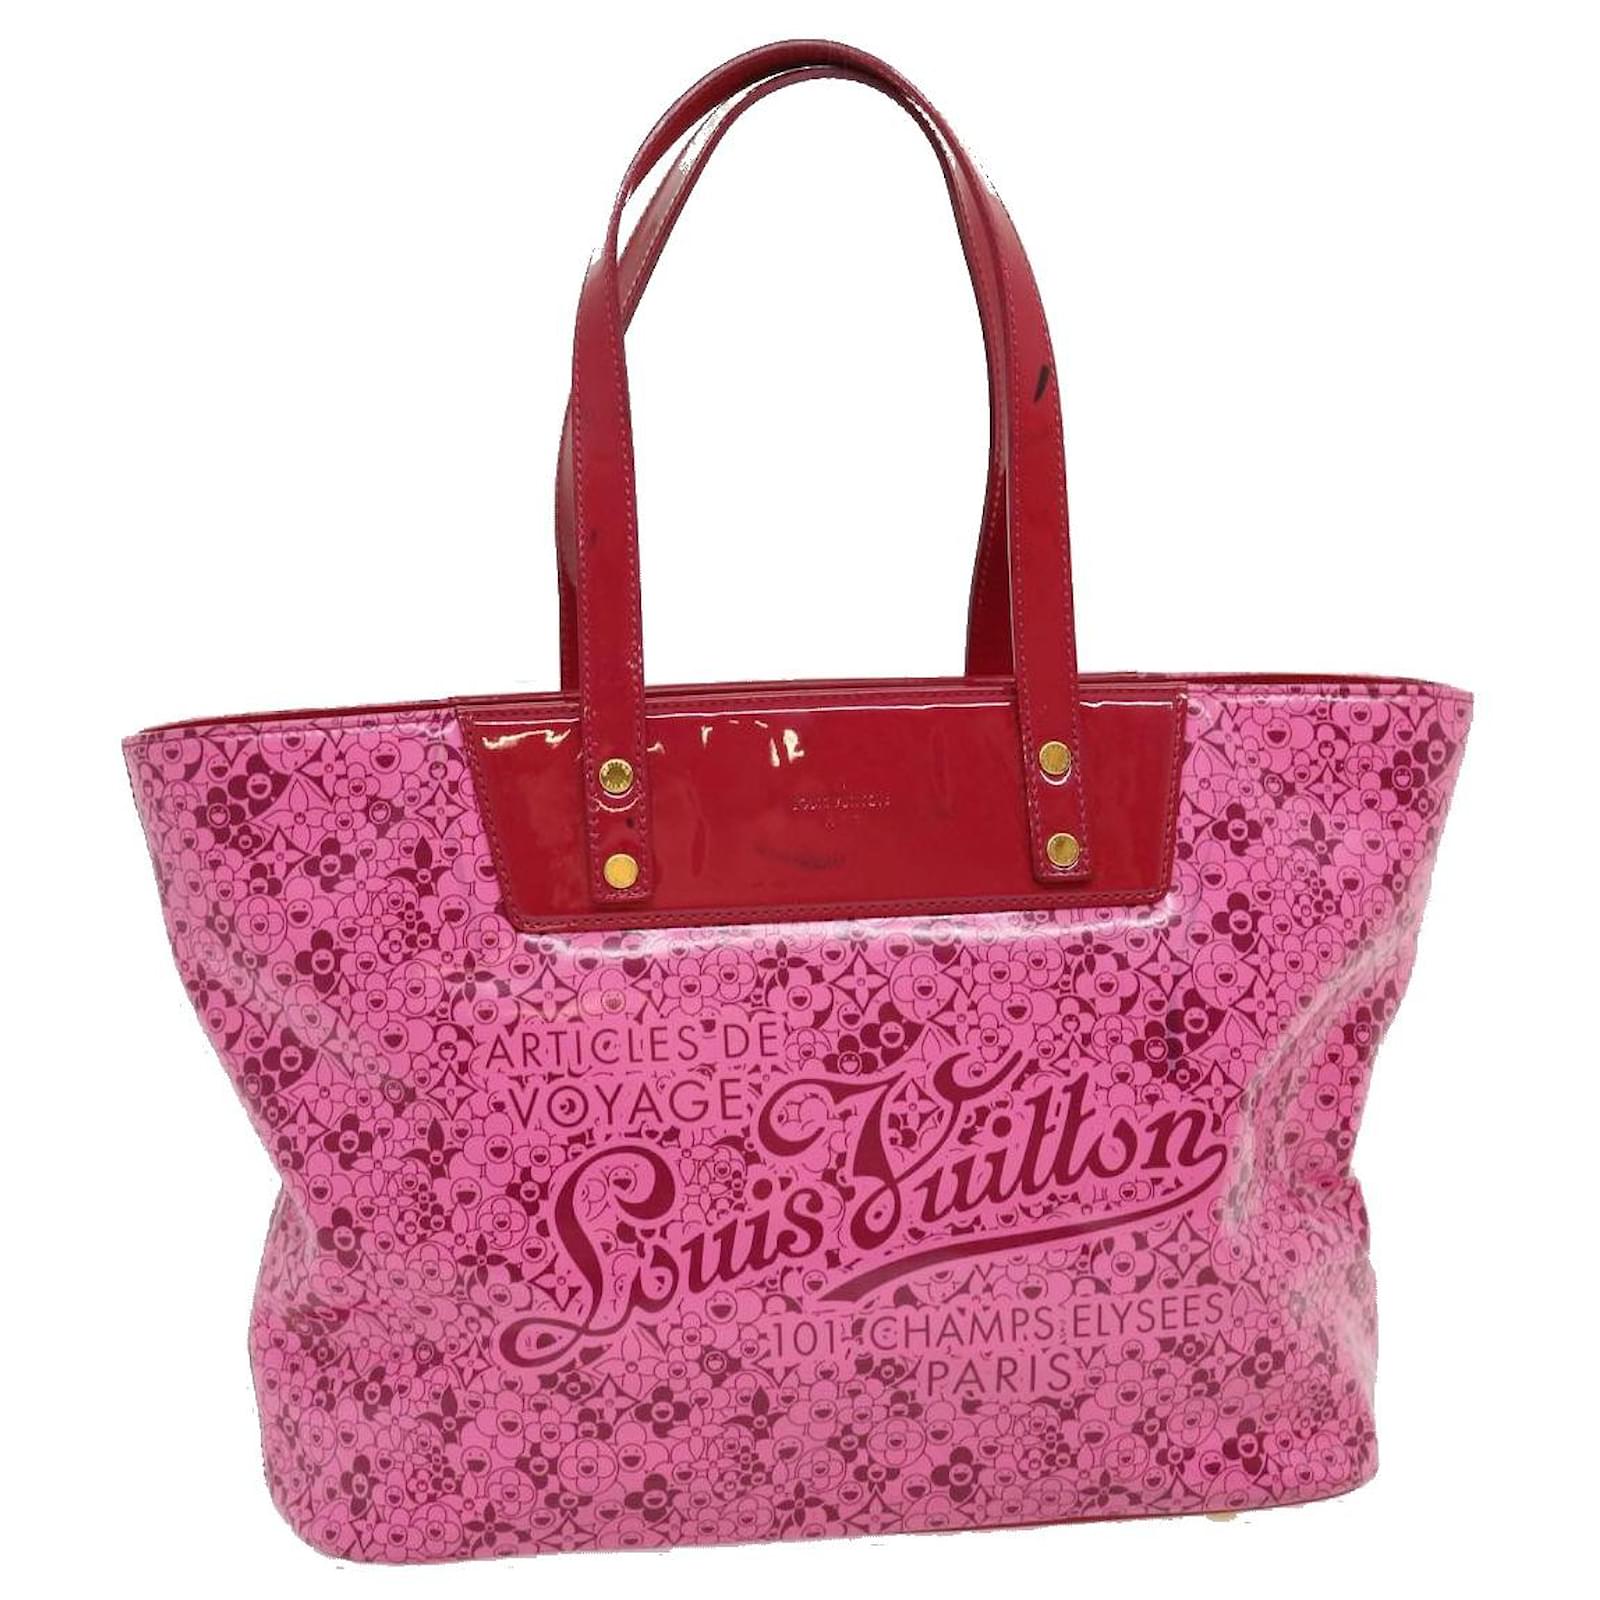 LOUIS VUITTON Cosmic Blossom PM Tote Bag Pink M93160 LV Auth